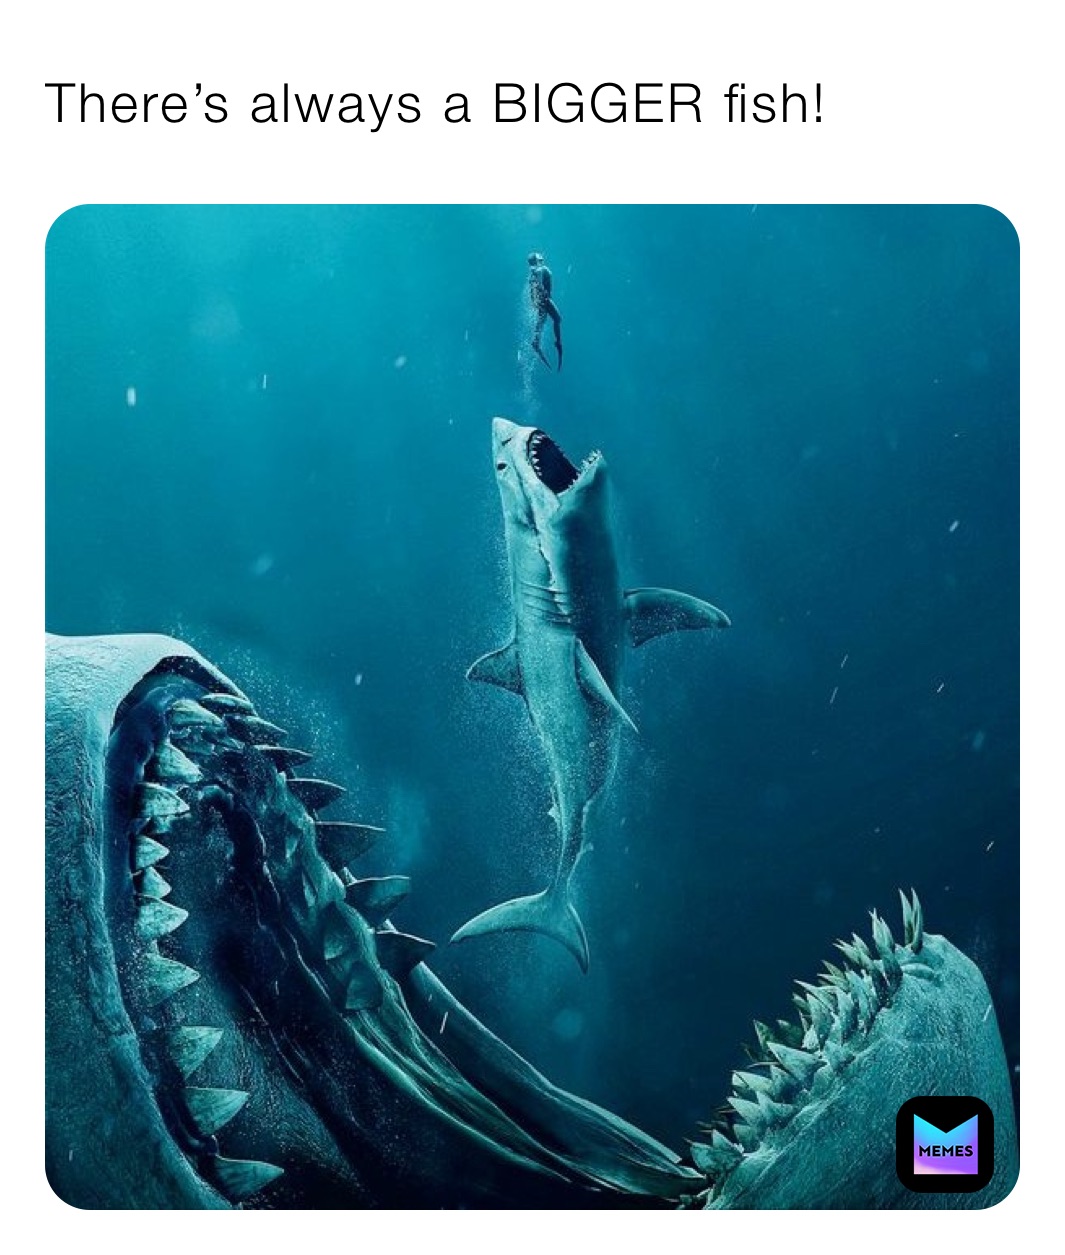 There’s always a BIGGER fish!